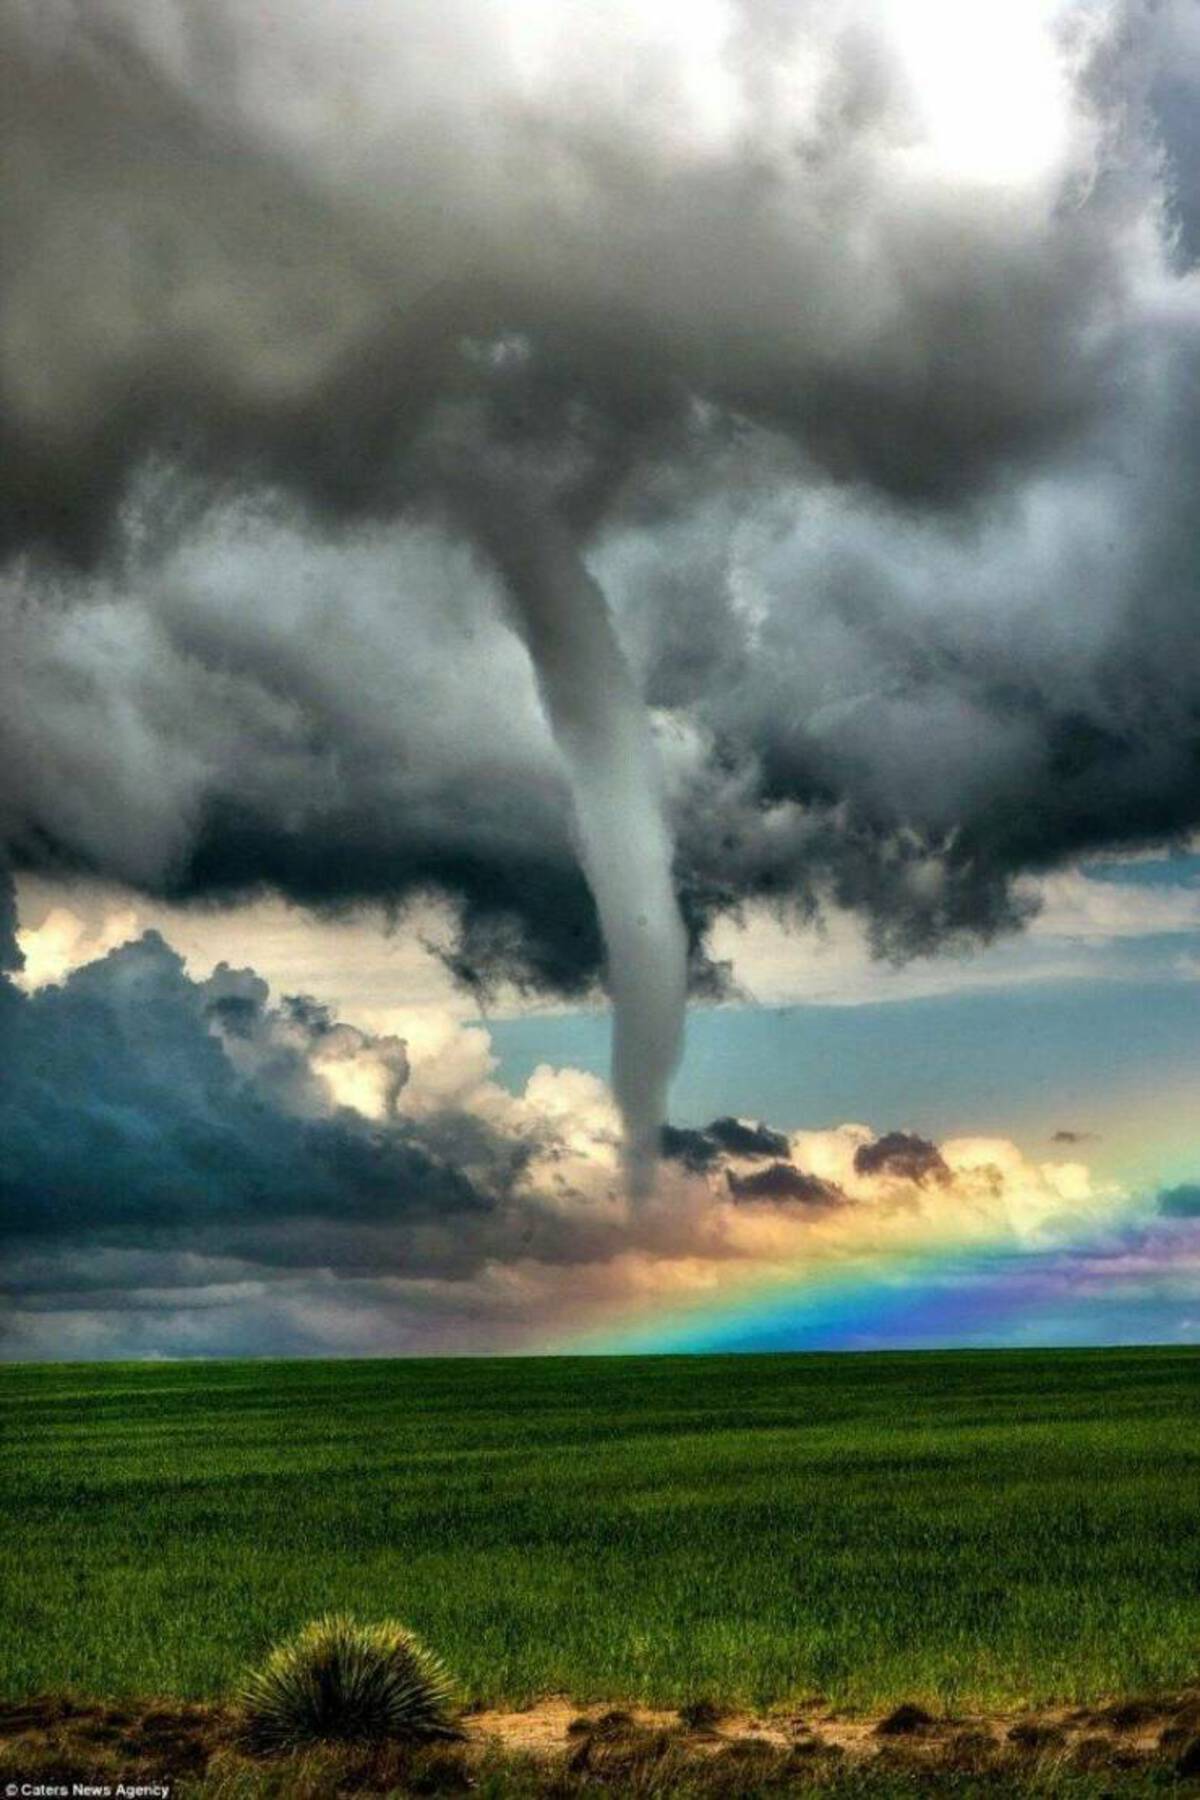 tornado wallpaper iphone - Caters News Agency